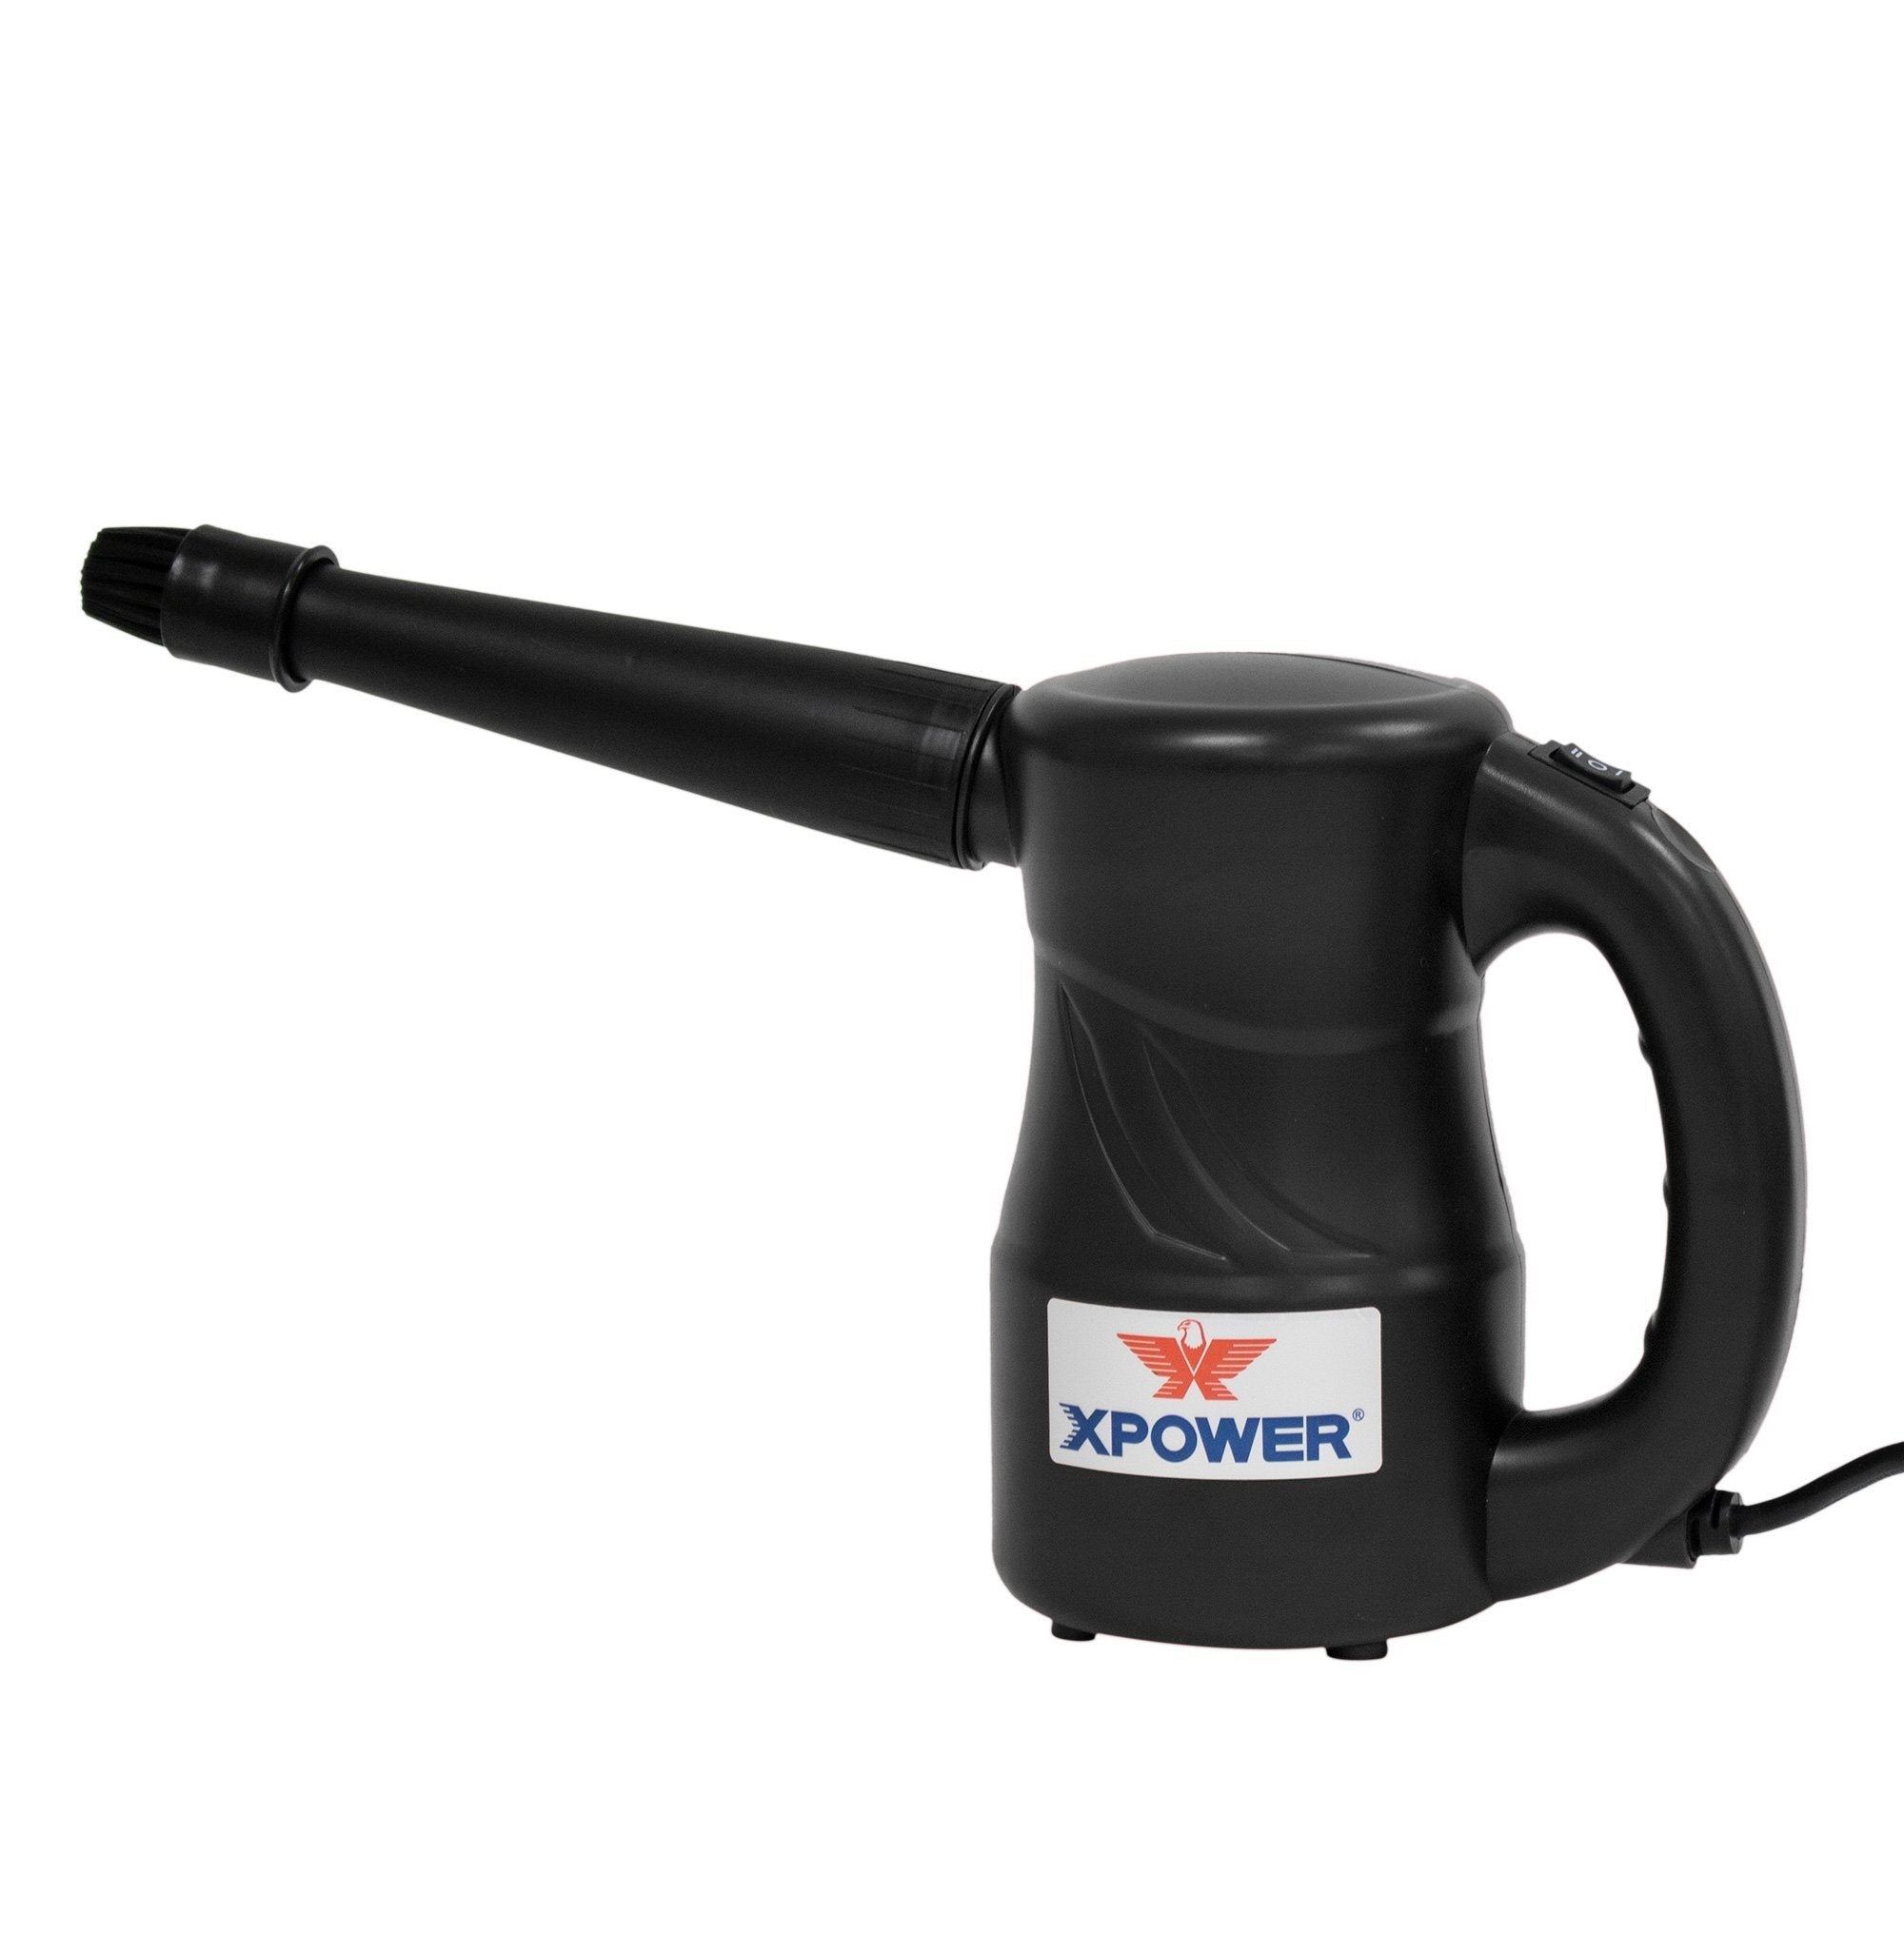 XPOWER A-2S Cyber Duster Multipurpose Electric Duster, Blower